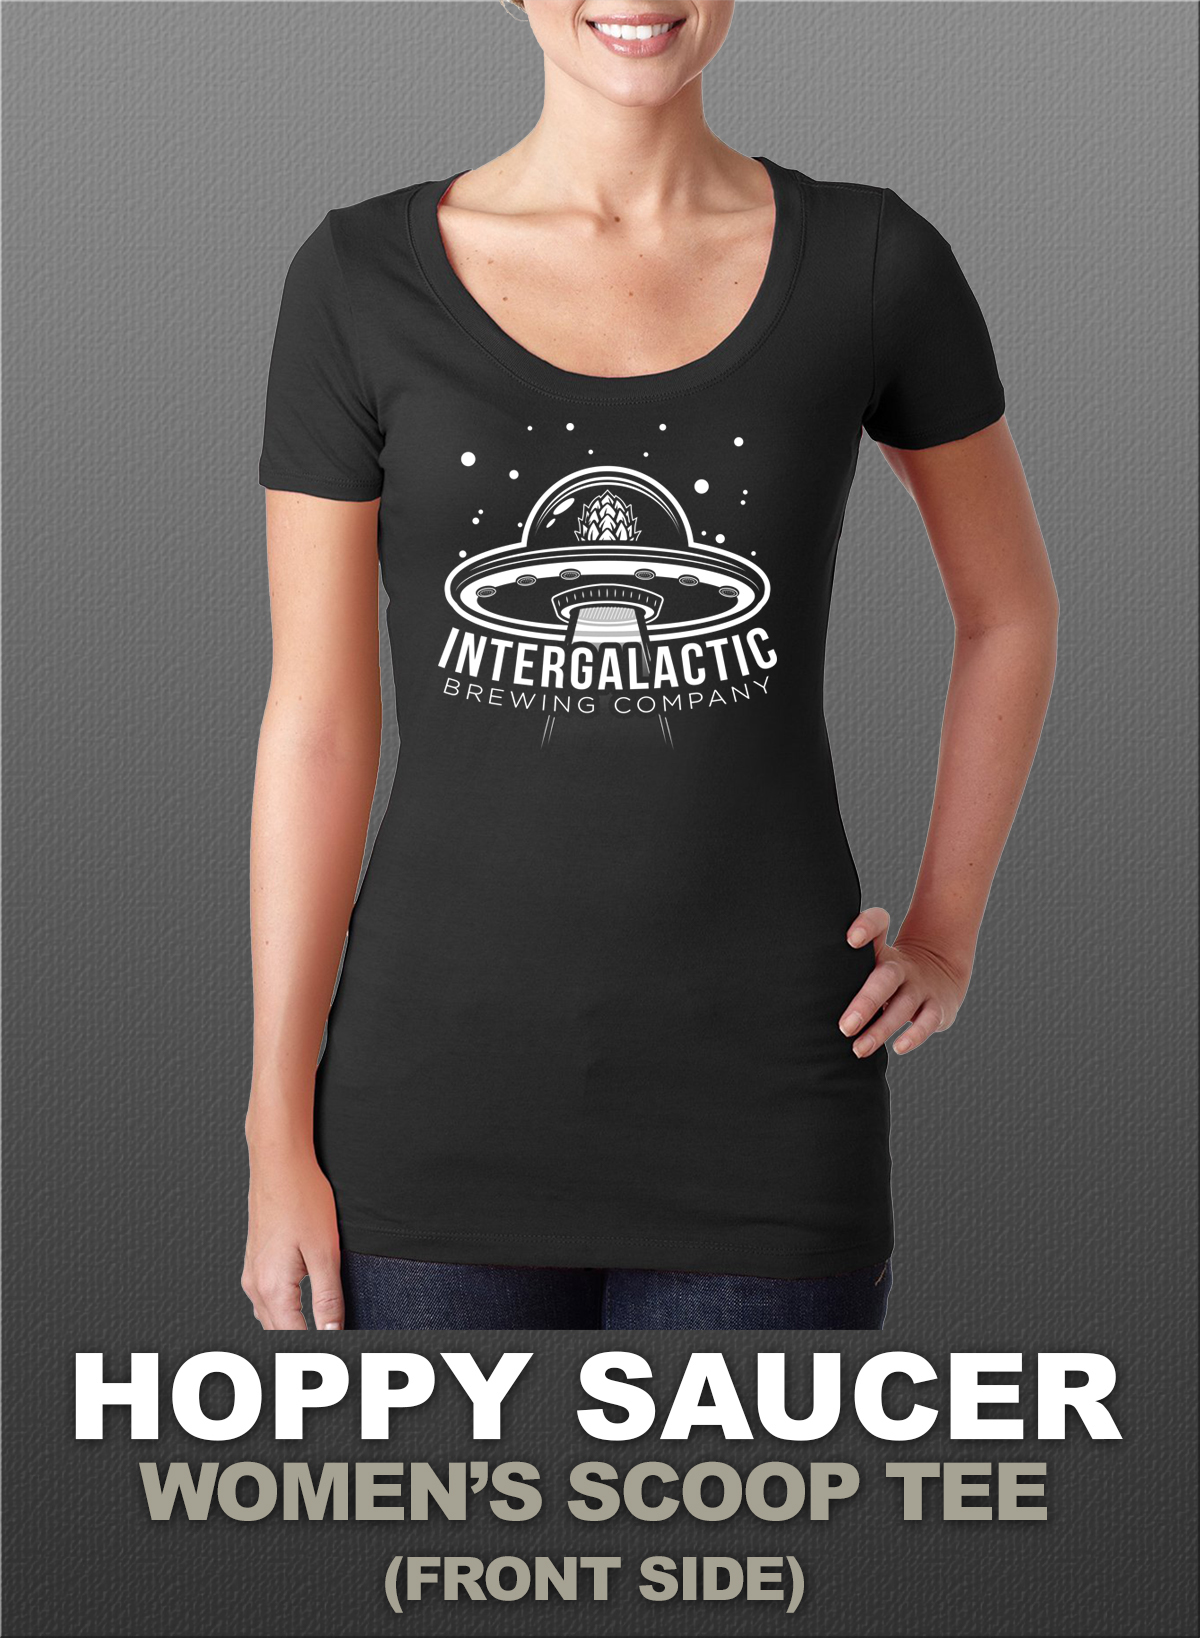 Intergalactic Brewing Company craft beer drink local brewery San Diego beer sci-fi science fiction flying saucer